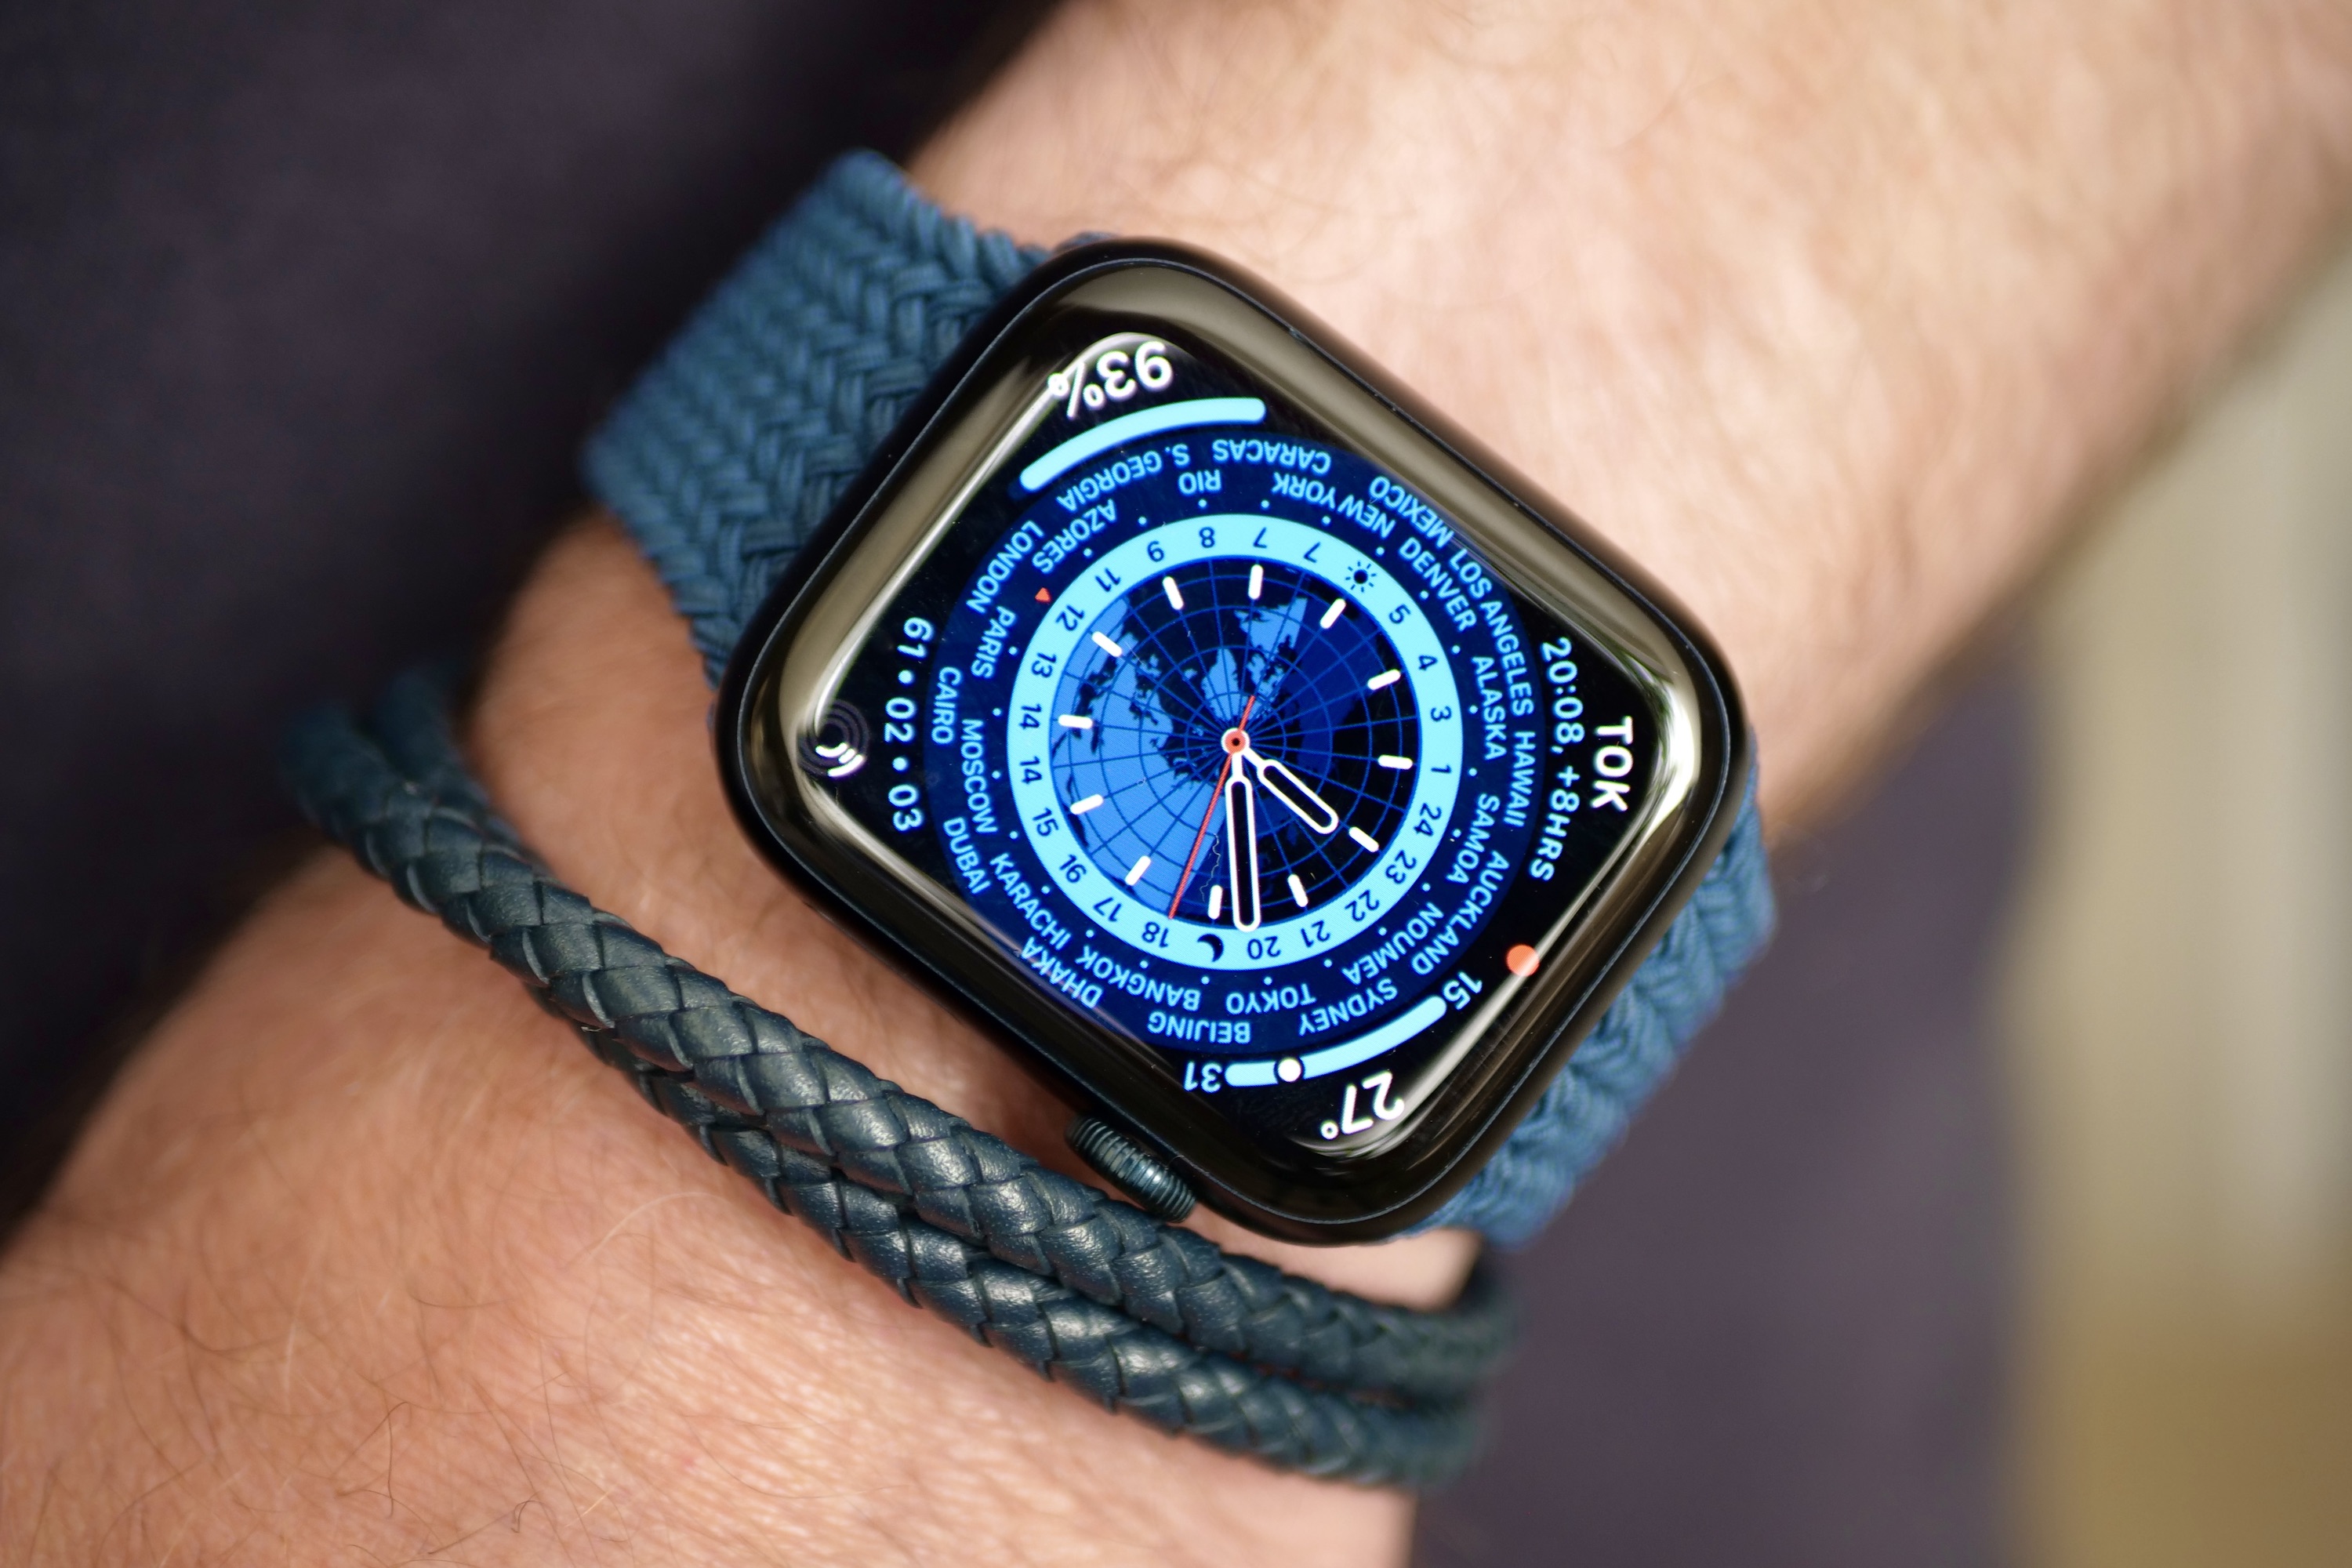 Why I wish I wore the Apple Watch more this year